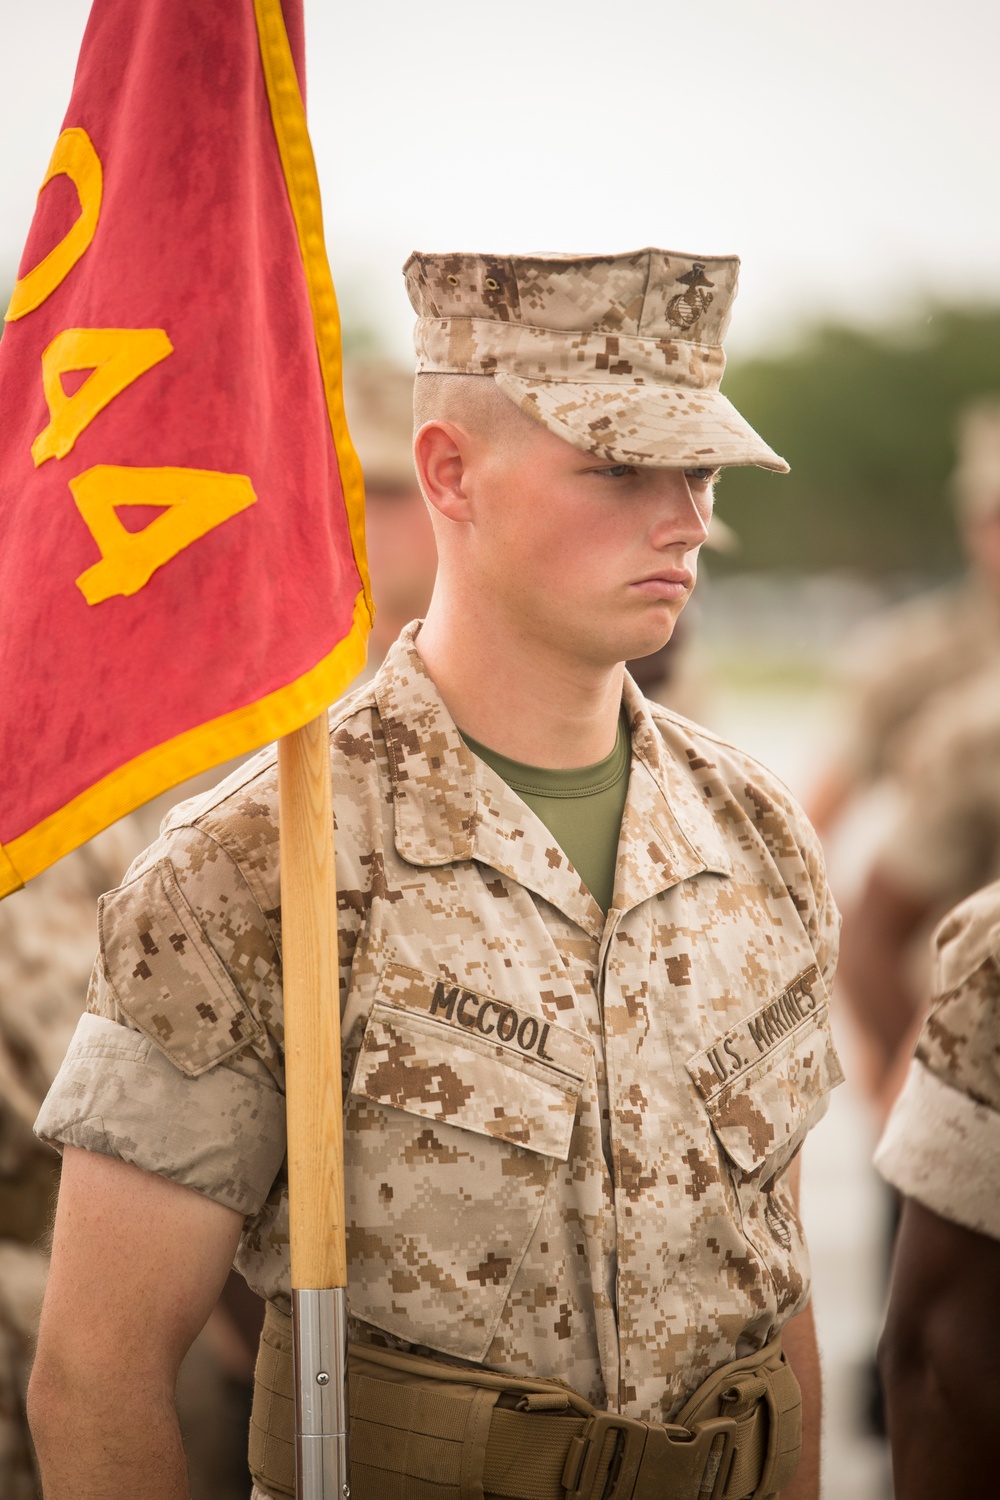 attention to orders marine corps